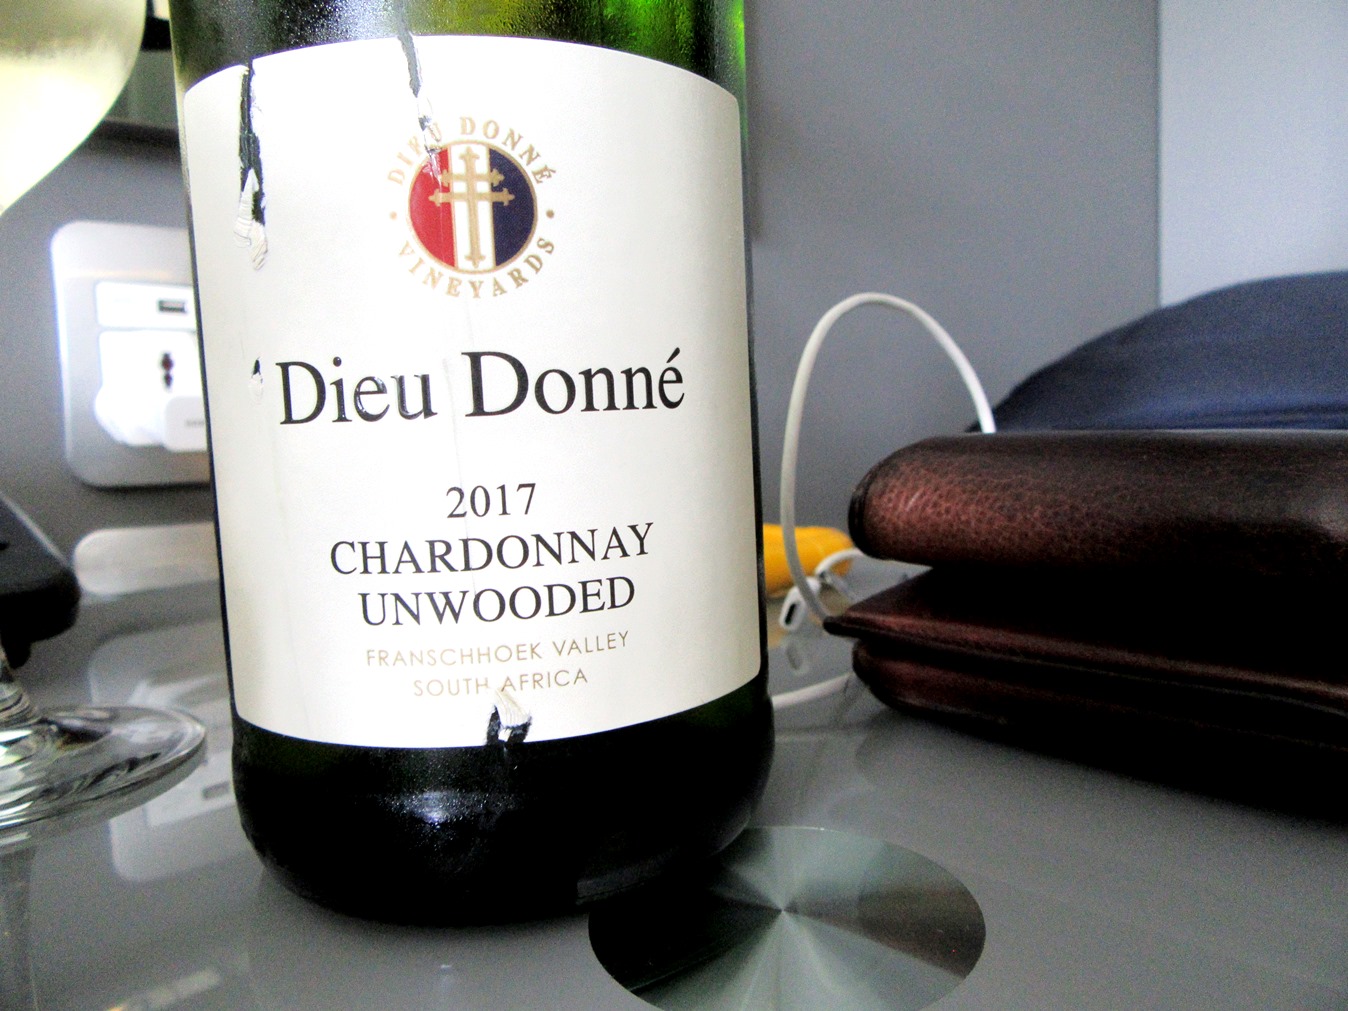 Dieu Donné, Unwooded Chardonnay 2017, Franschhoek, South Africa, Wine Casual